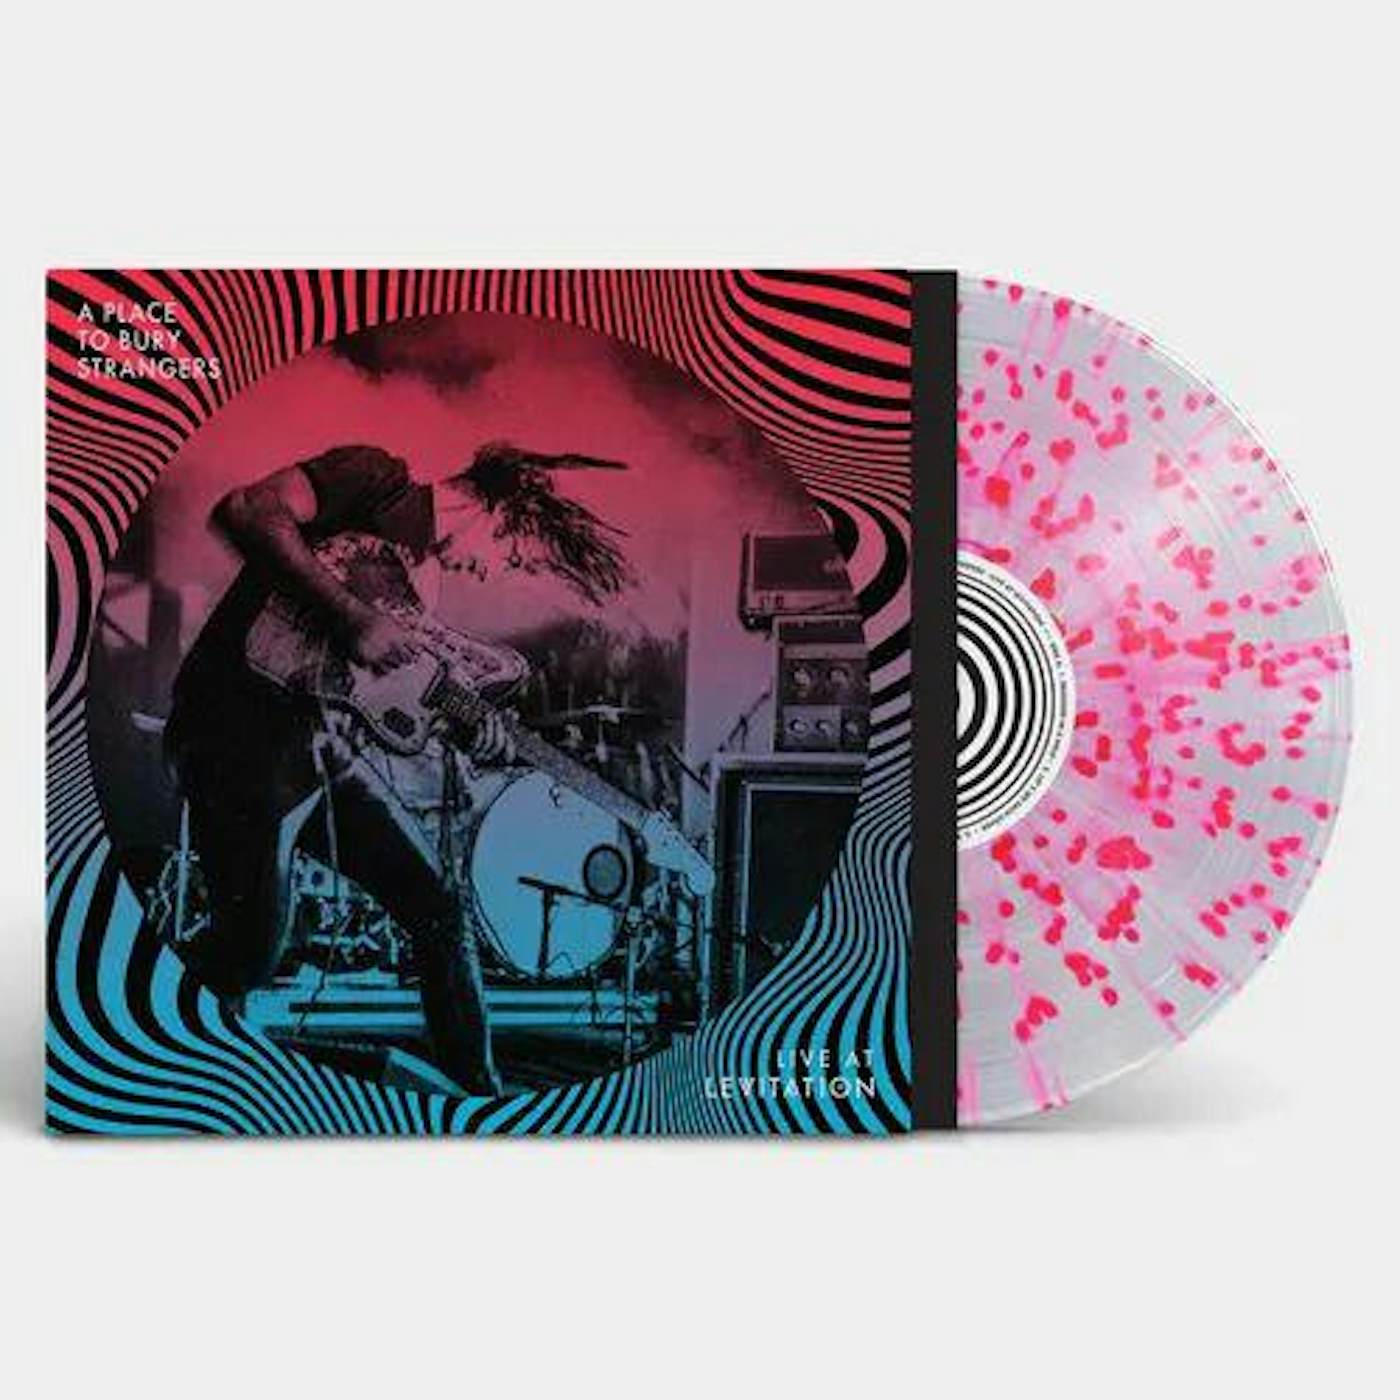 A Place To Bury Strangers Live At Levitation  (Clear W/ Neon Pink Splatter Vinyl Record) (I)